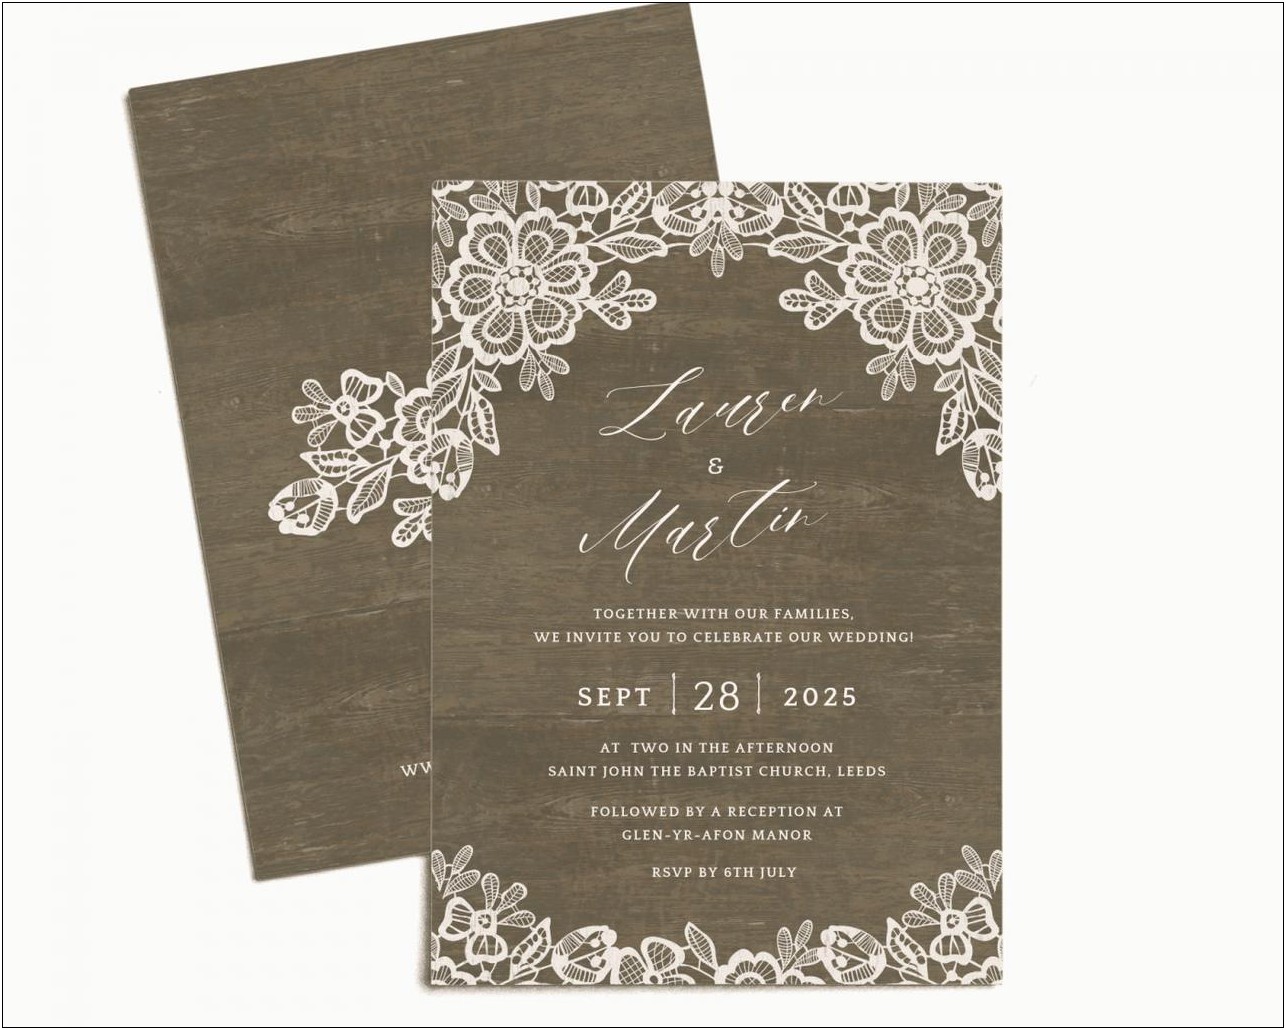 Rustic Country Wood Twinkle Lights Lace Wedding Invitation